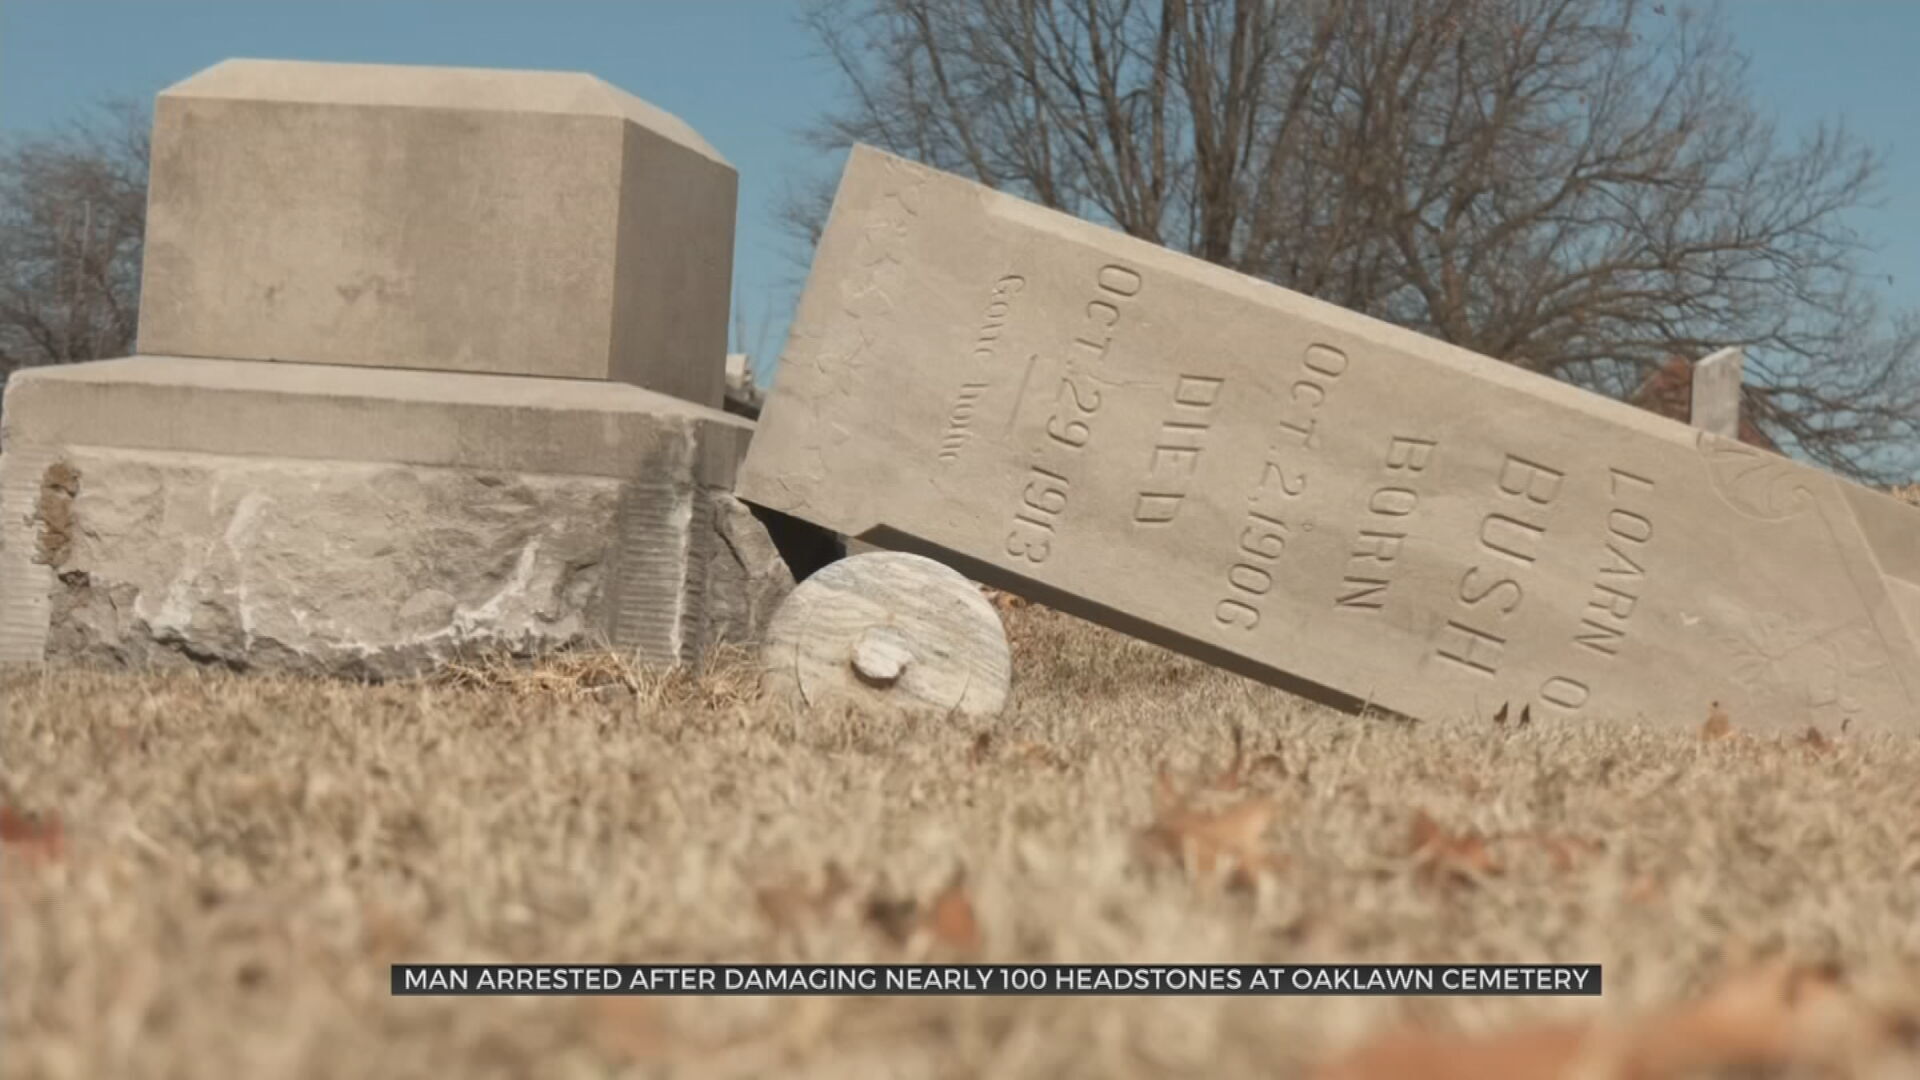 City Says At Least 60 Headstones Damaged At Oaklawn Cemetery, Suspect Arrested  